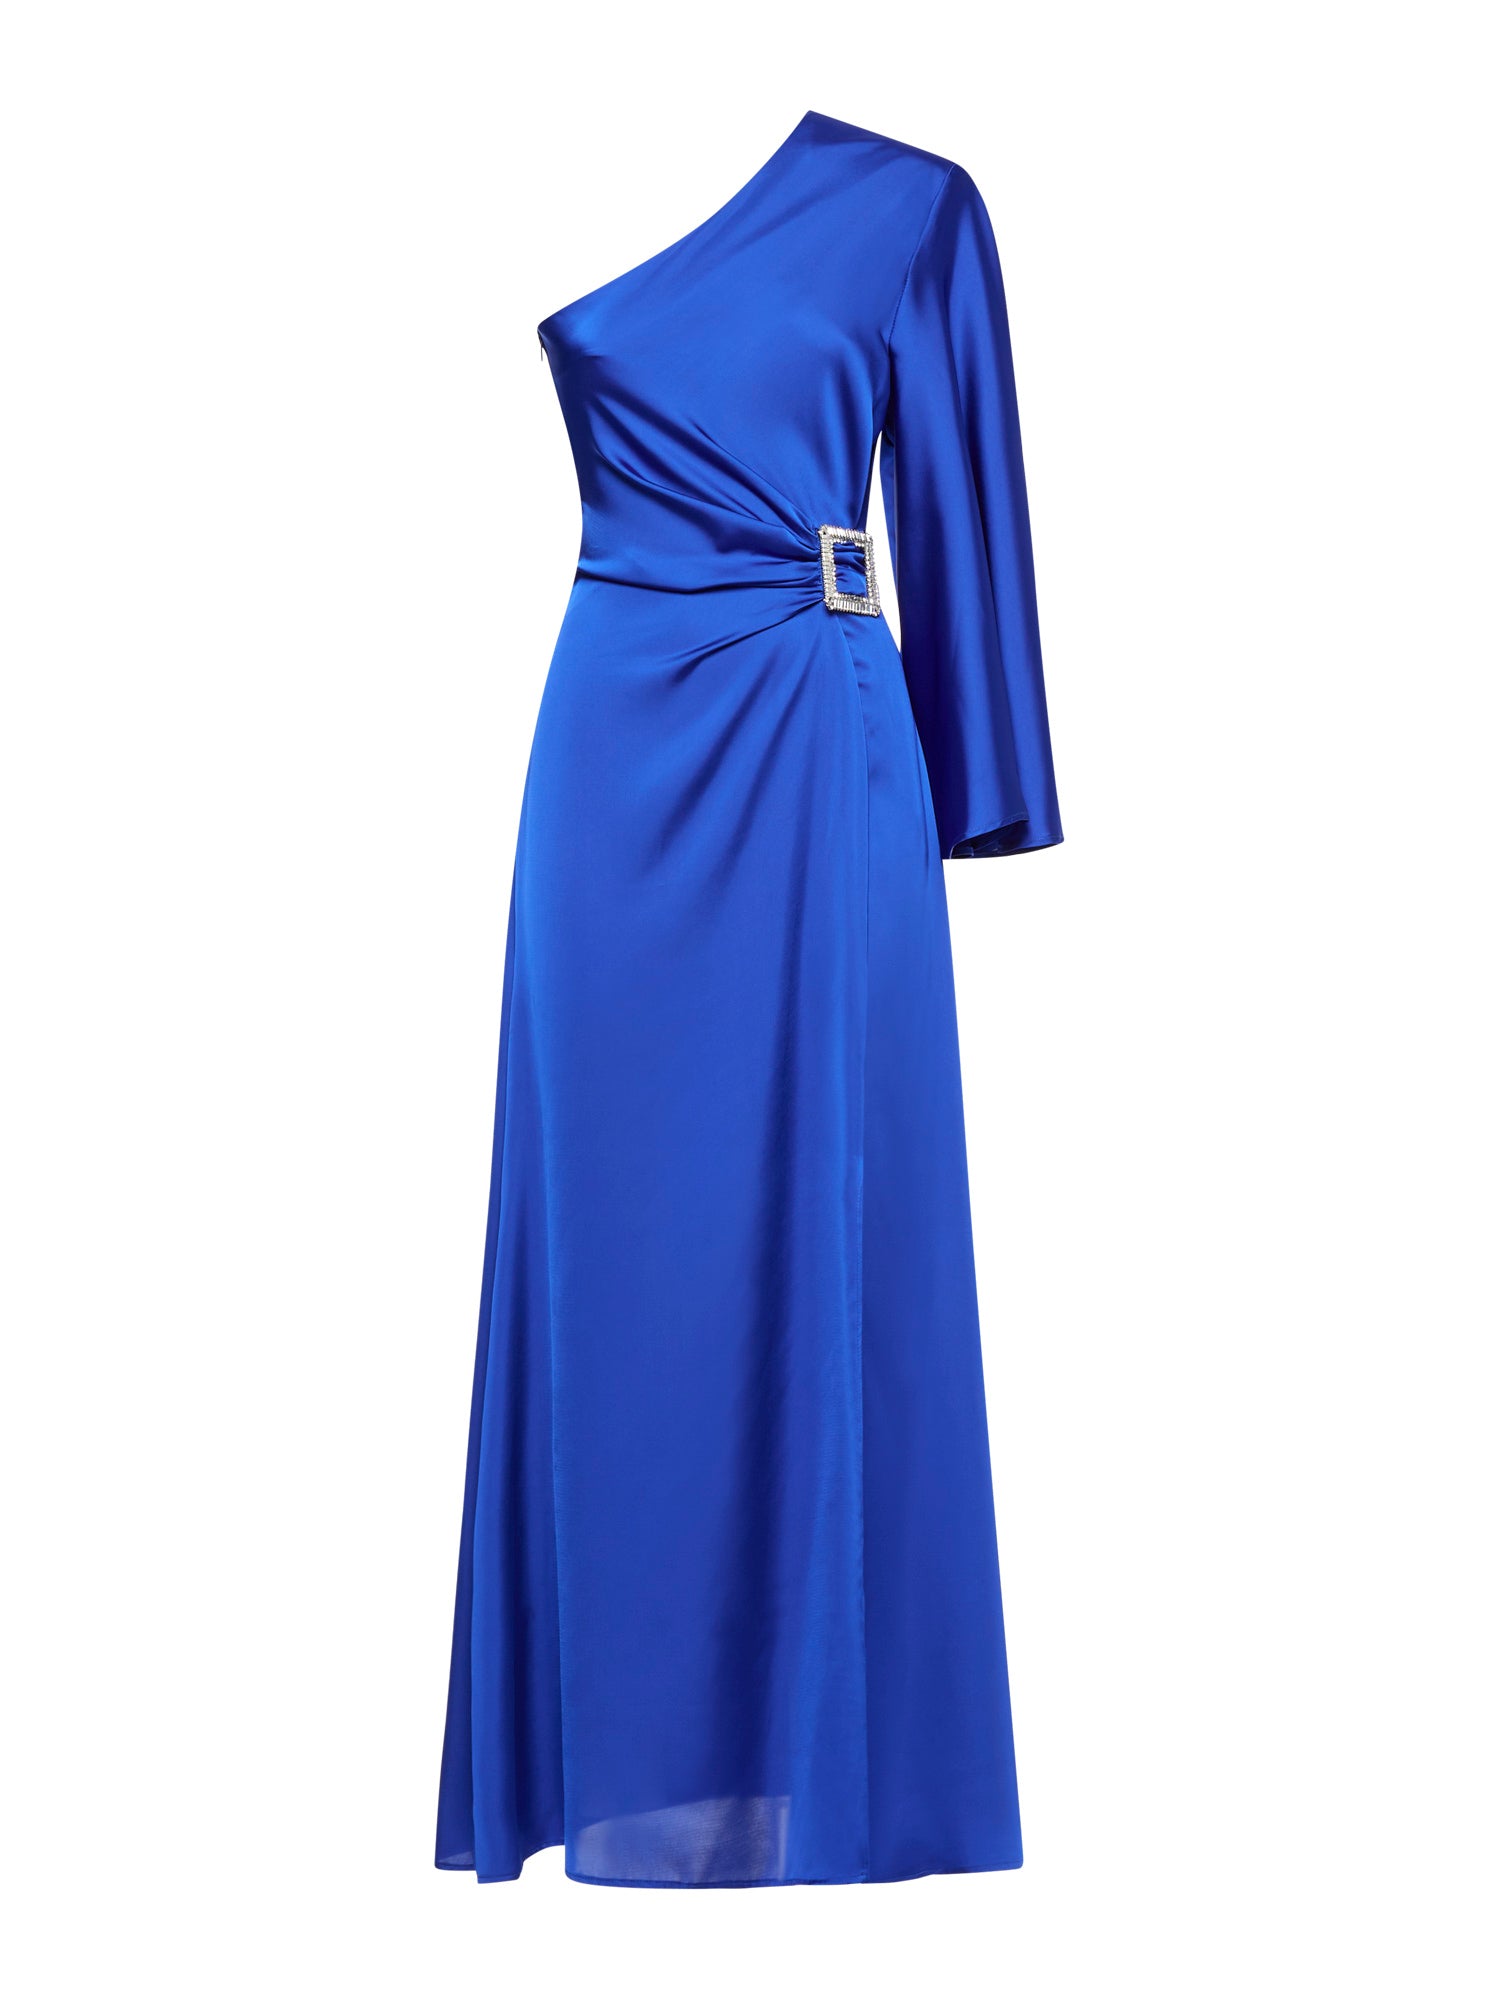 One-shoulder dress in fluid satin with jewelled buckle